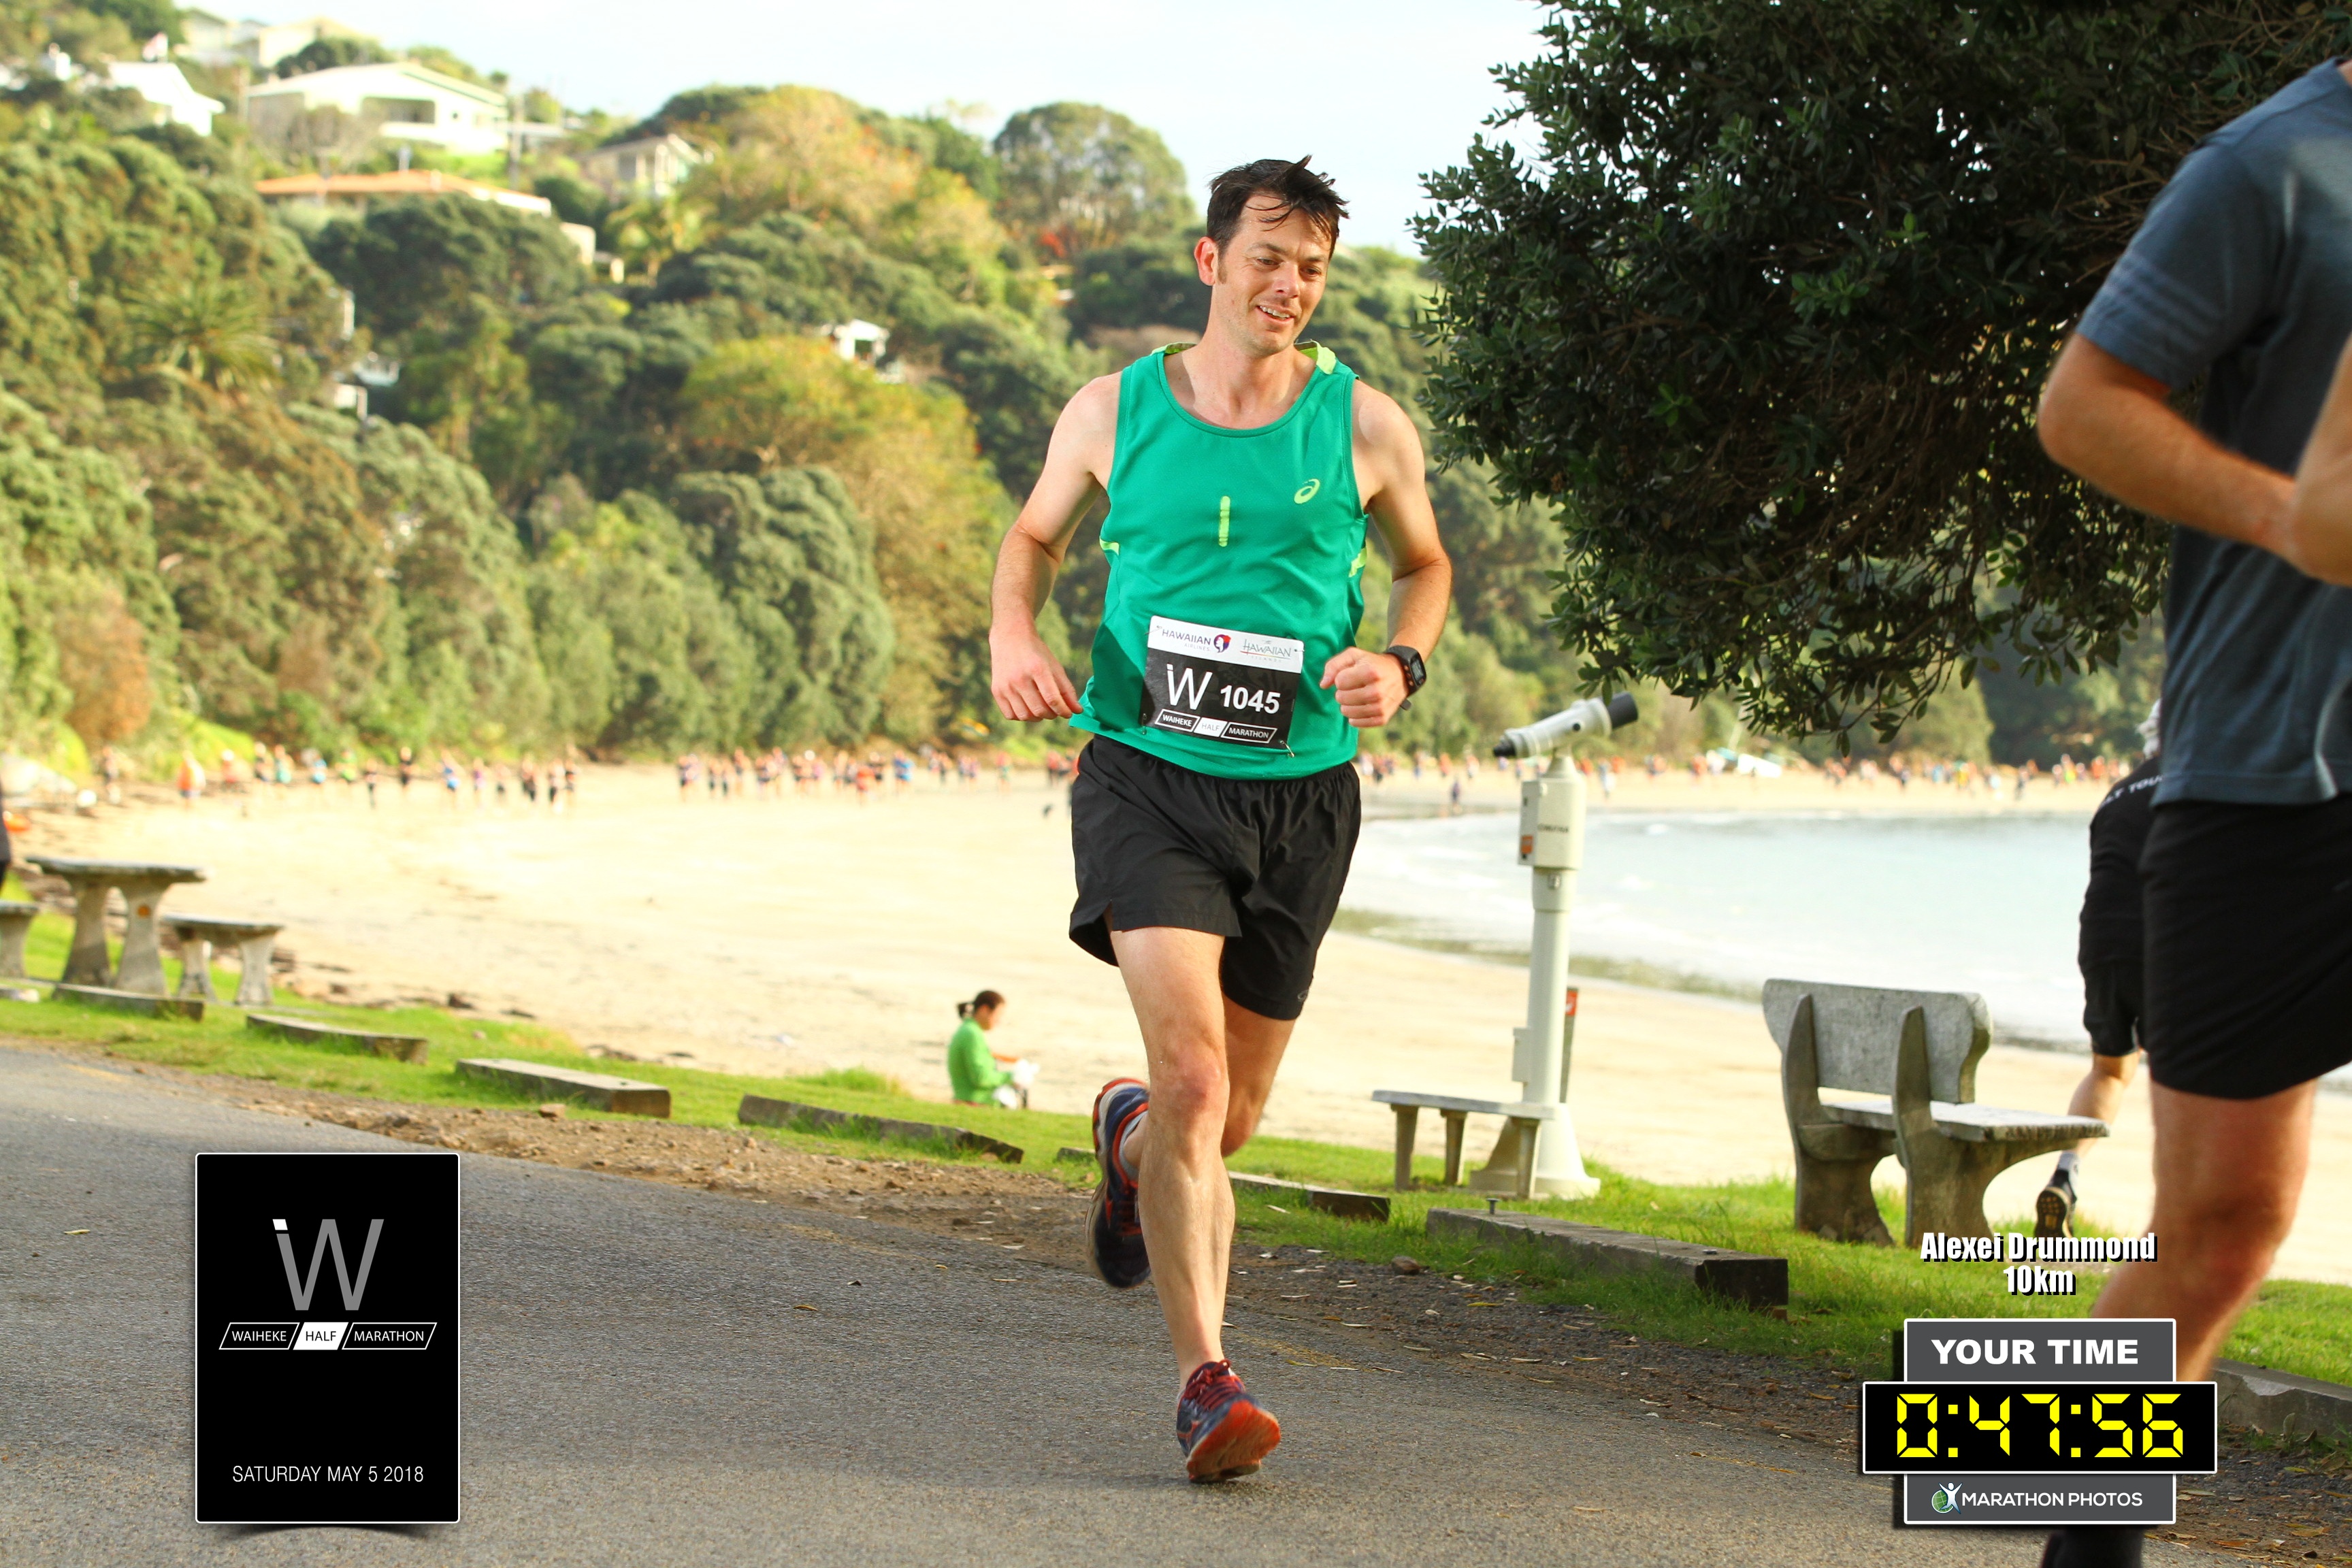 About 3.5km into the race running along Oneroa beach. You can make out the long line of runners on the beach behind me.